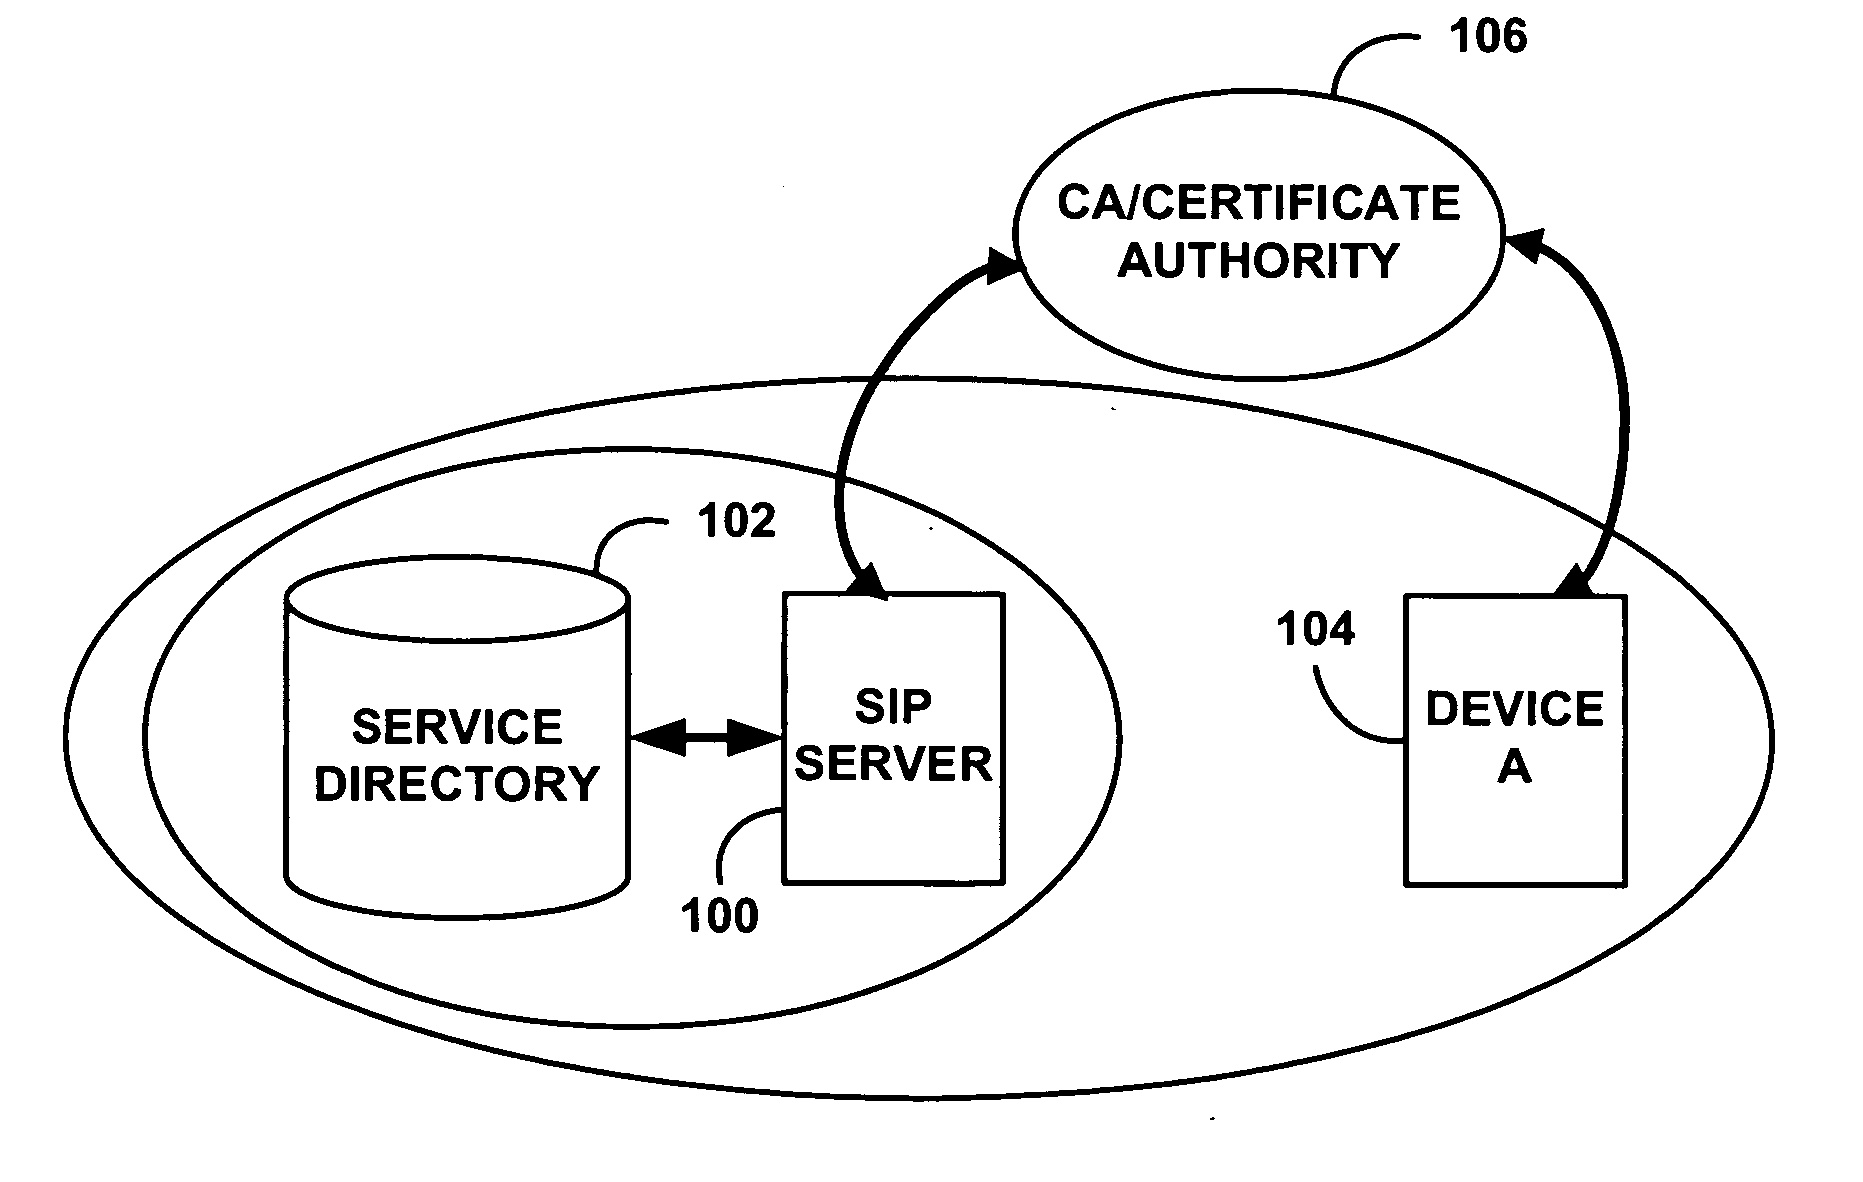 Service discovery using session initiating protocol (SIP)